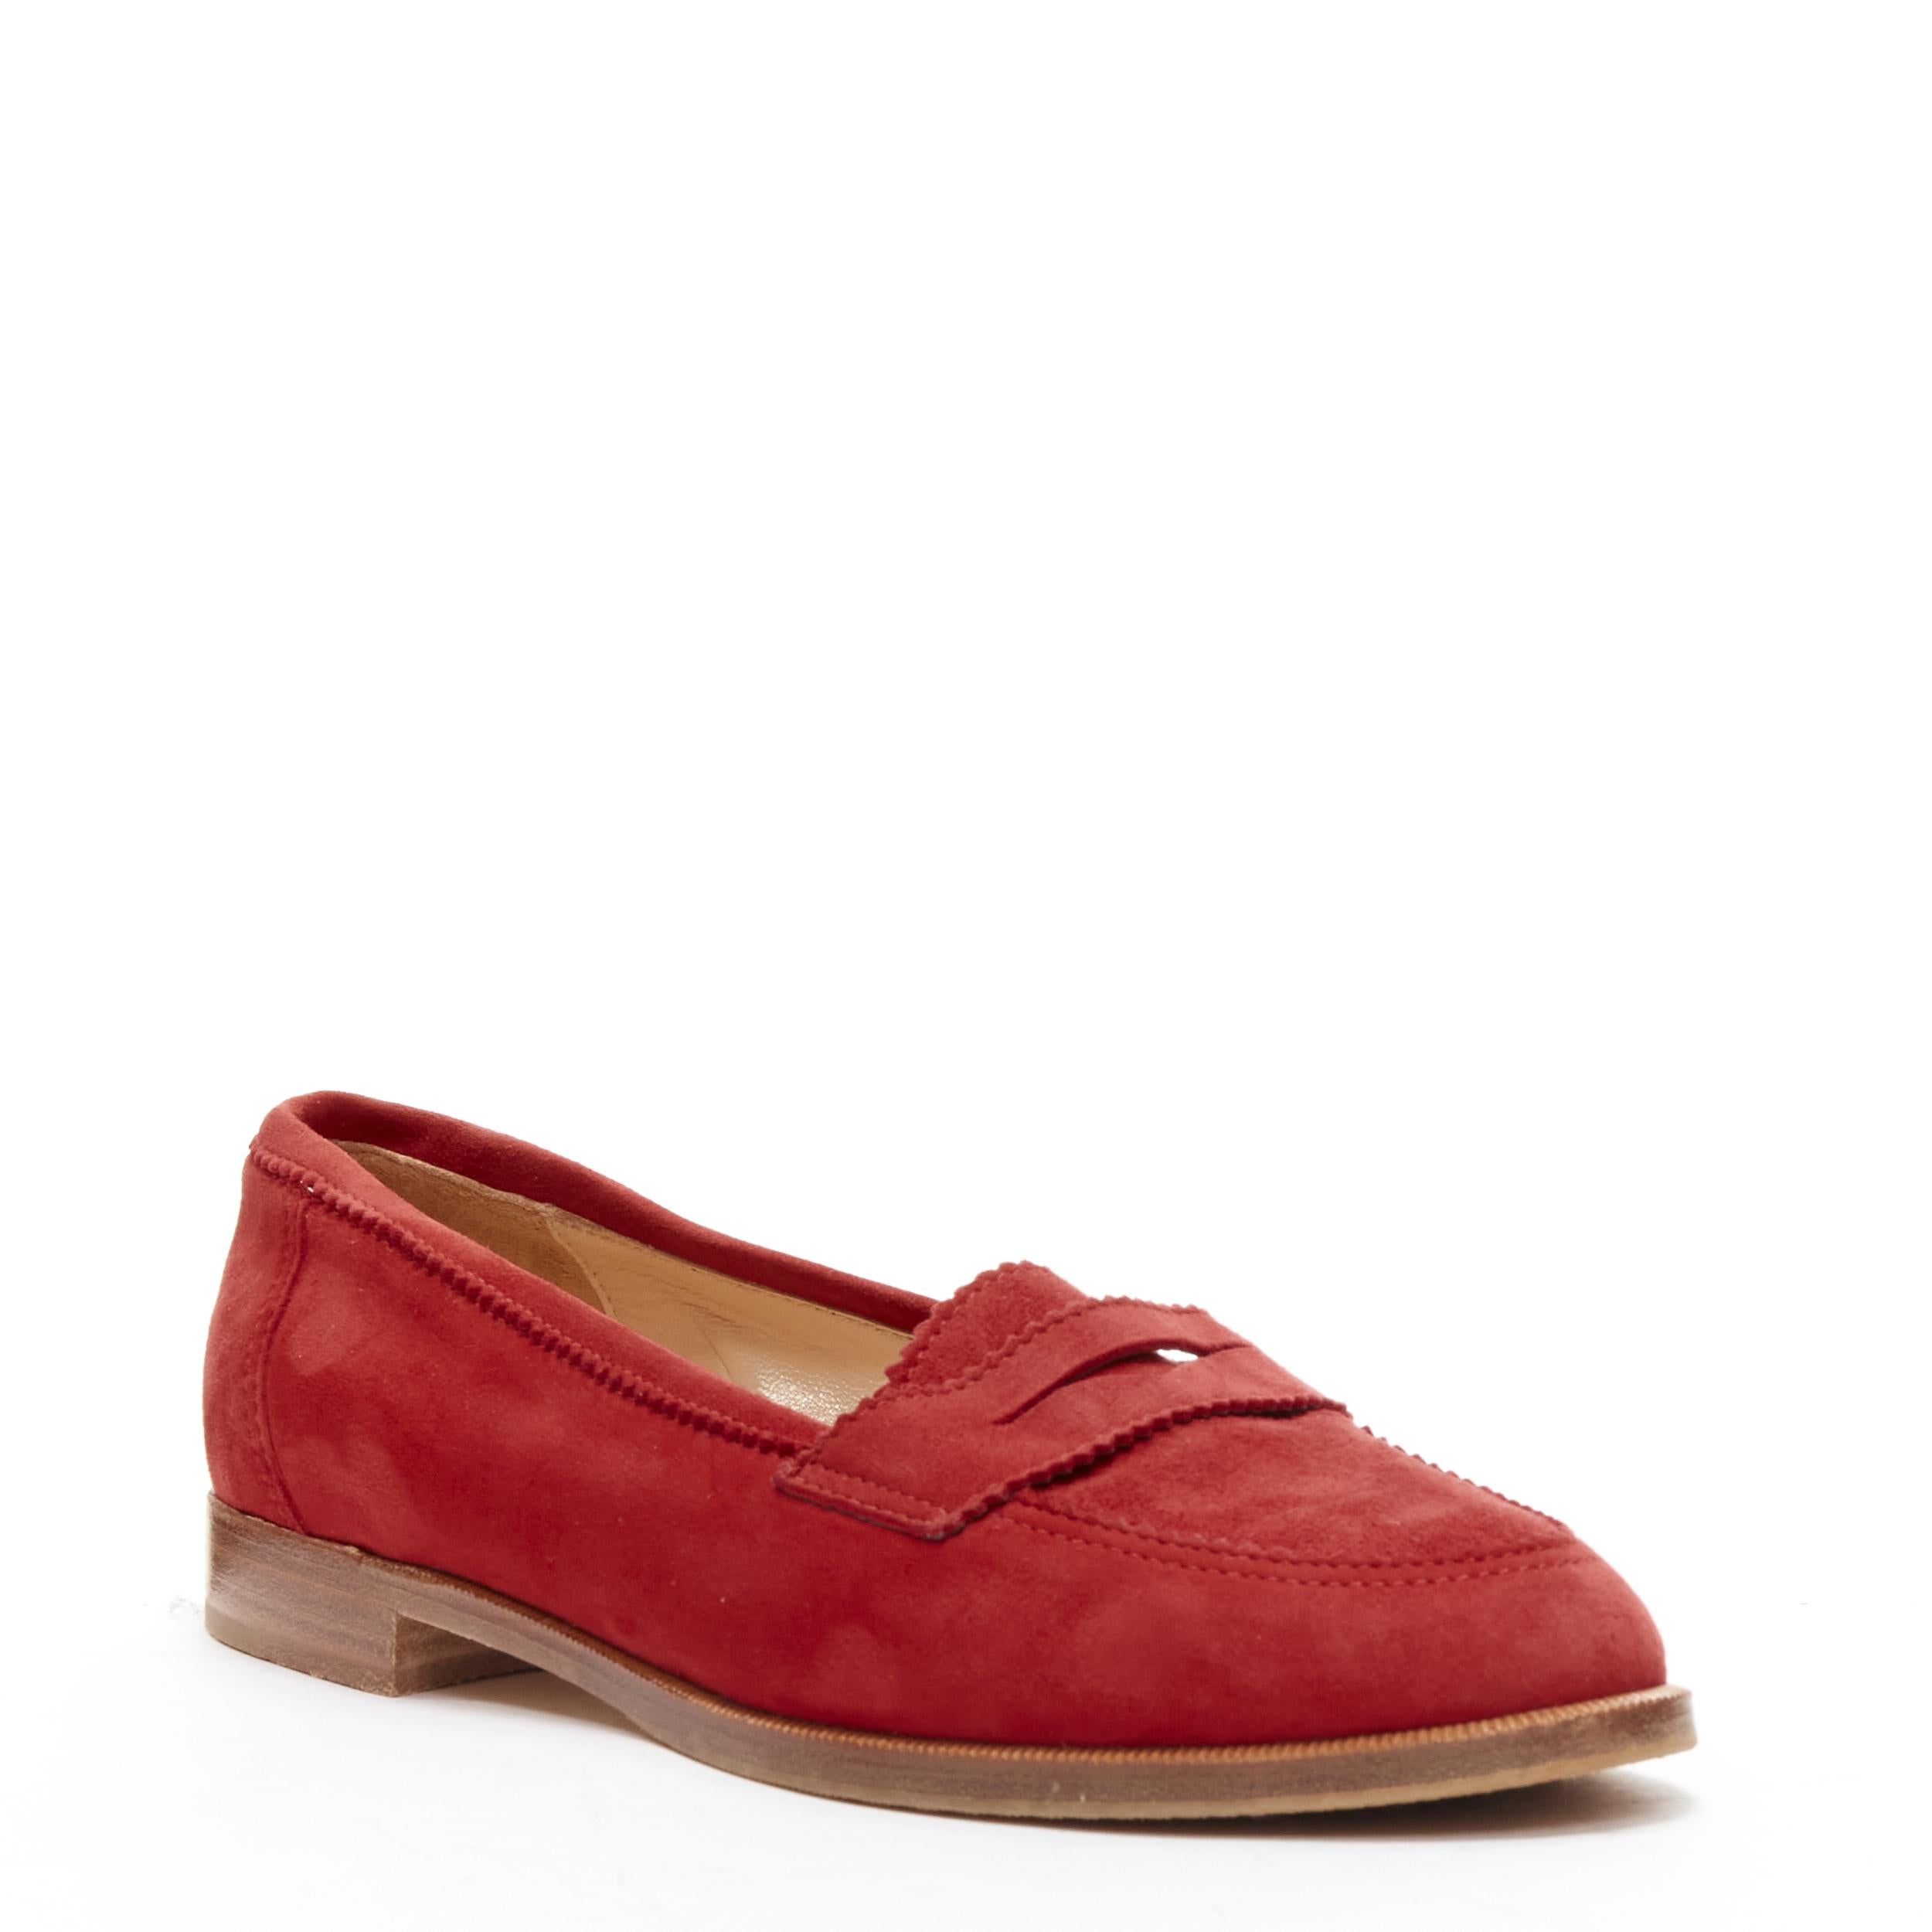 Red MANOLO BLAHNIK red suede leather classic penny loafer EU37 For Sale